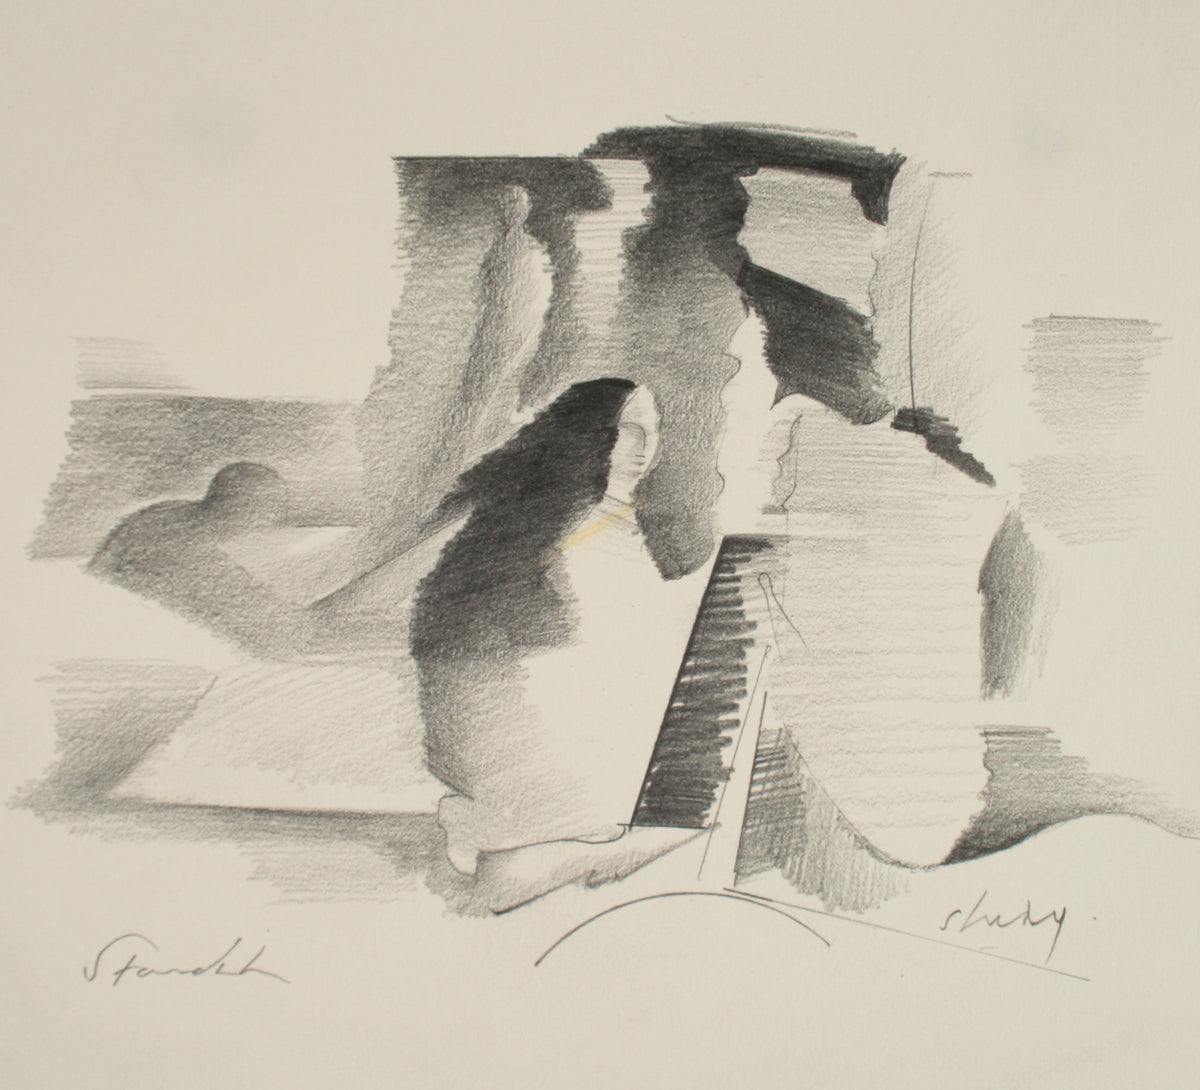 Abstracted Graphite Figures &lt;br&gt;Late 20th Century Graphite&lt;br&gt;&lt;br&gt;#71510